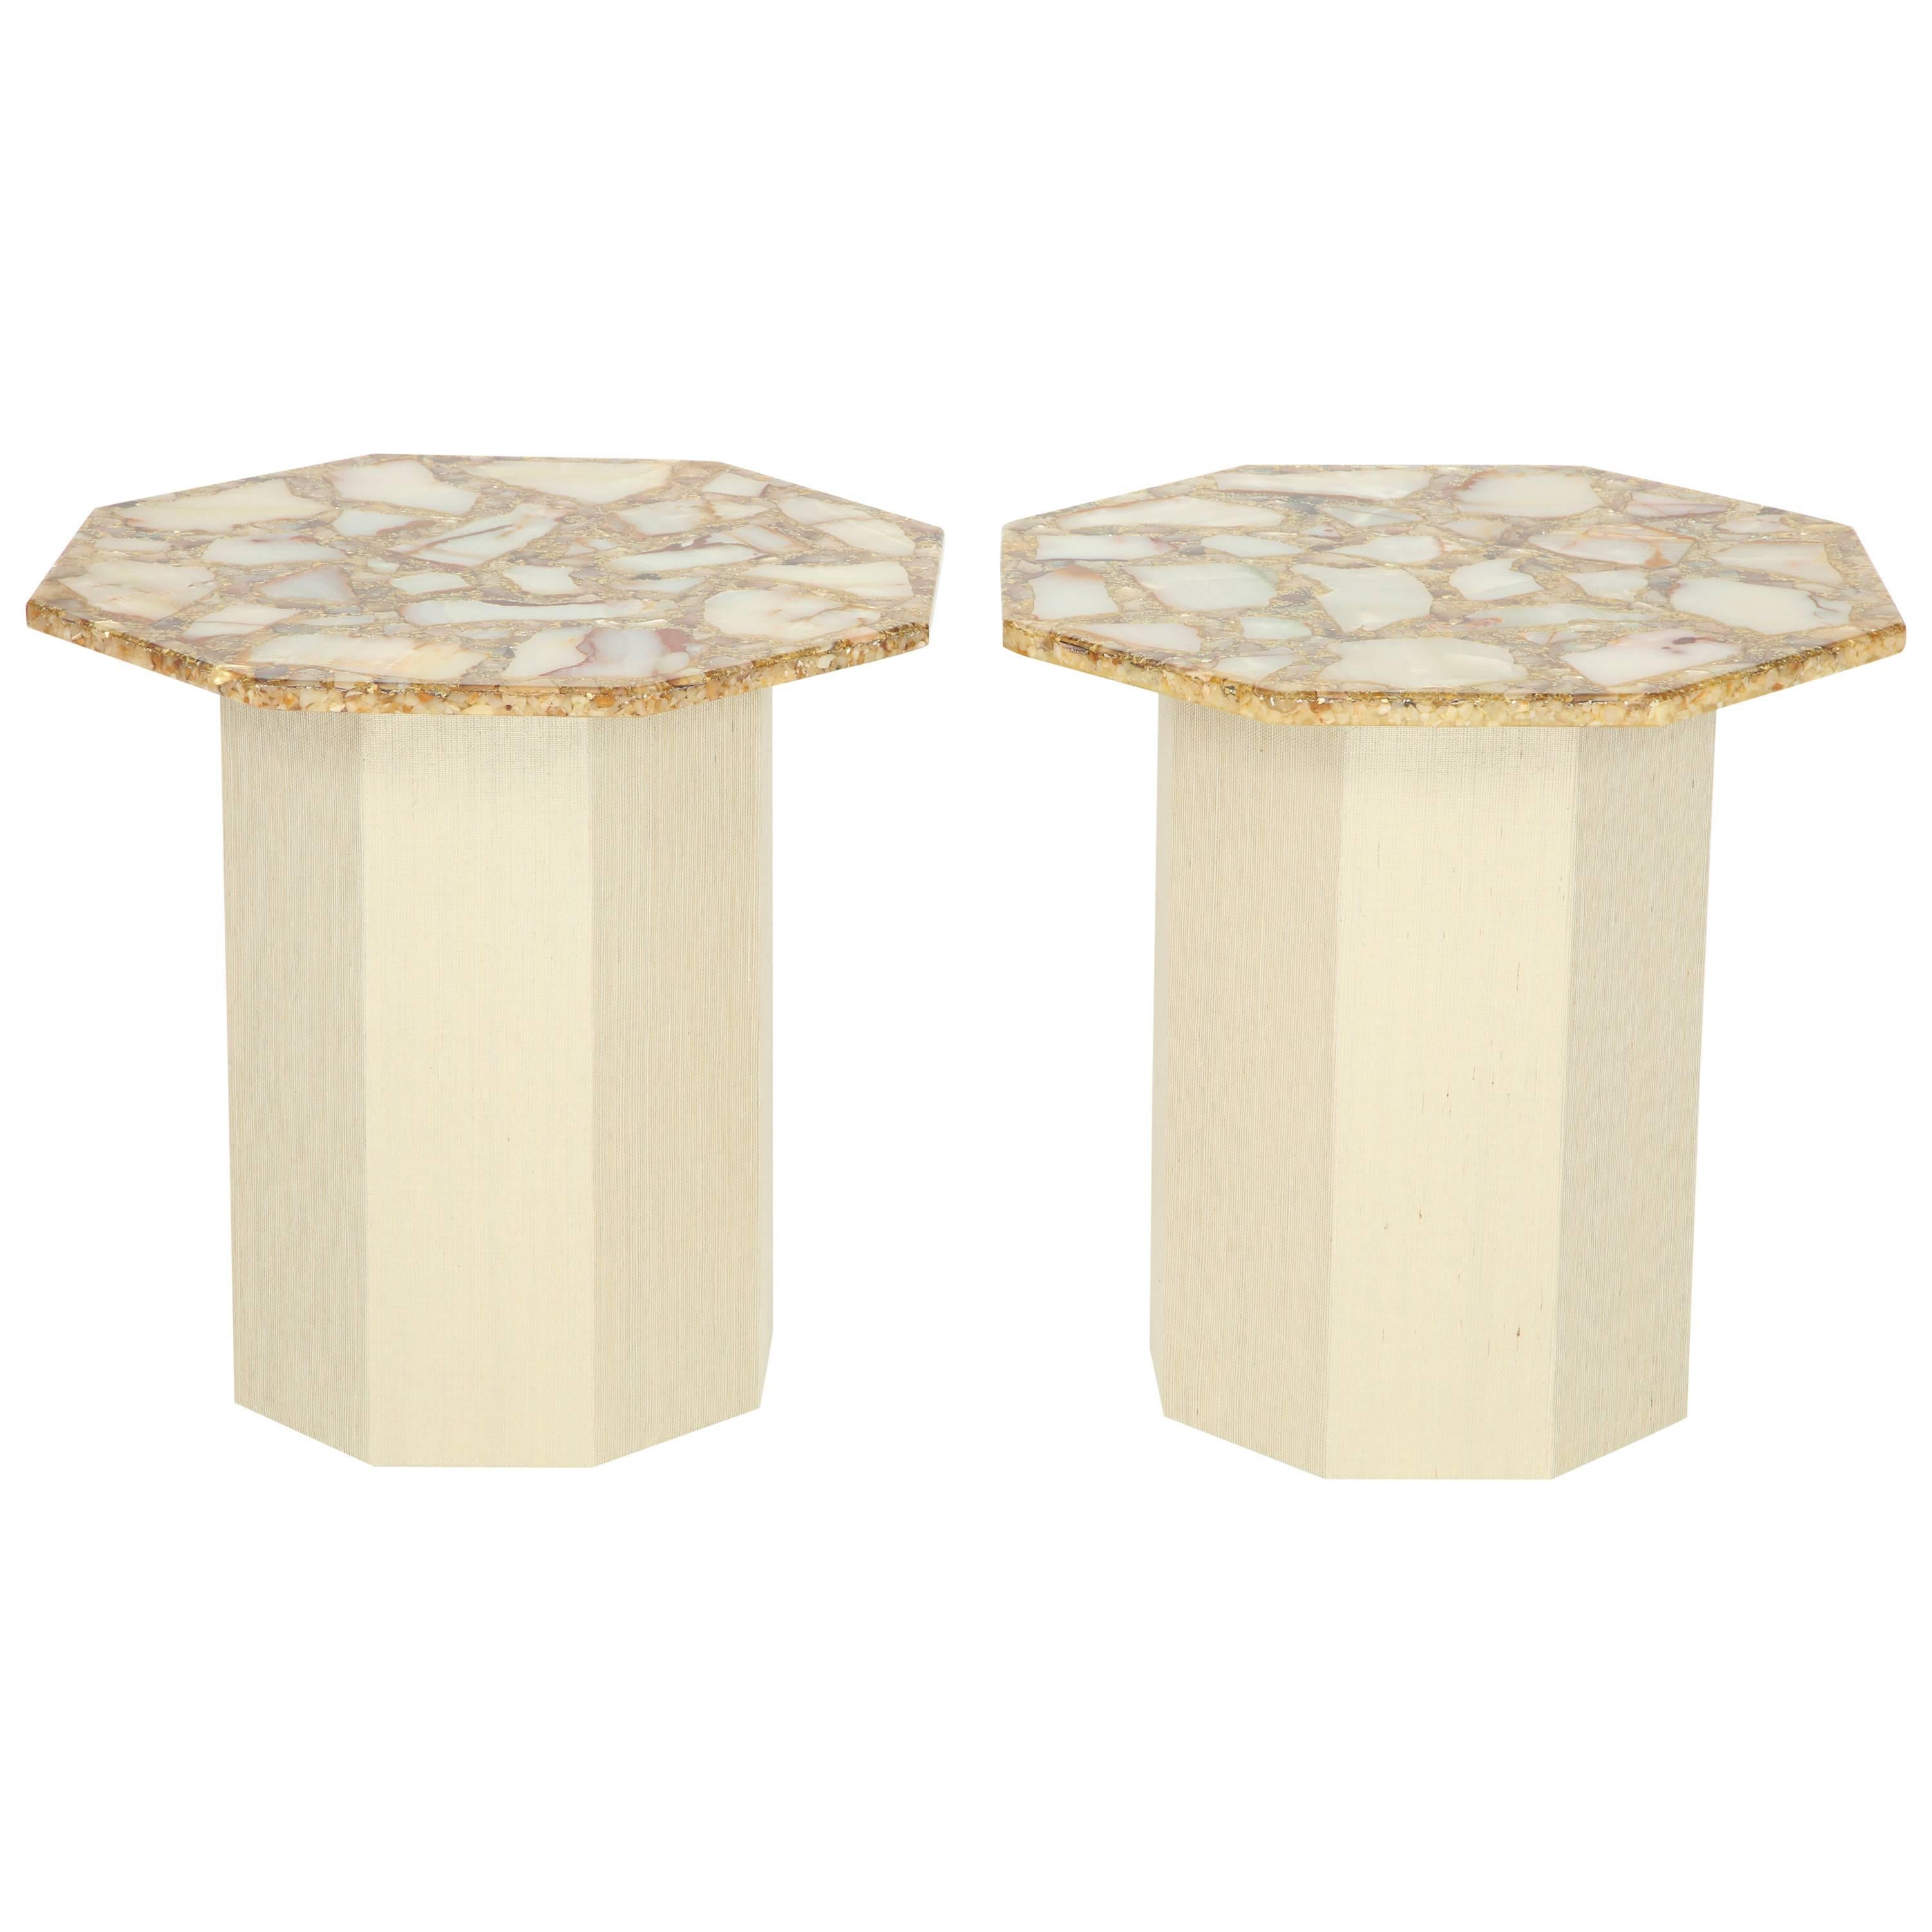 Pair of Octagonal Agate Side Tables